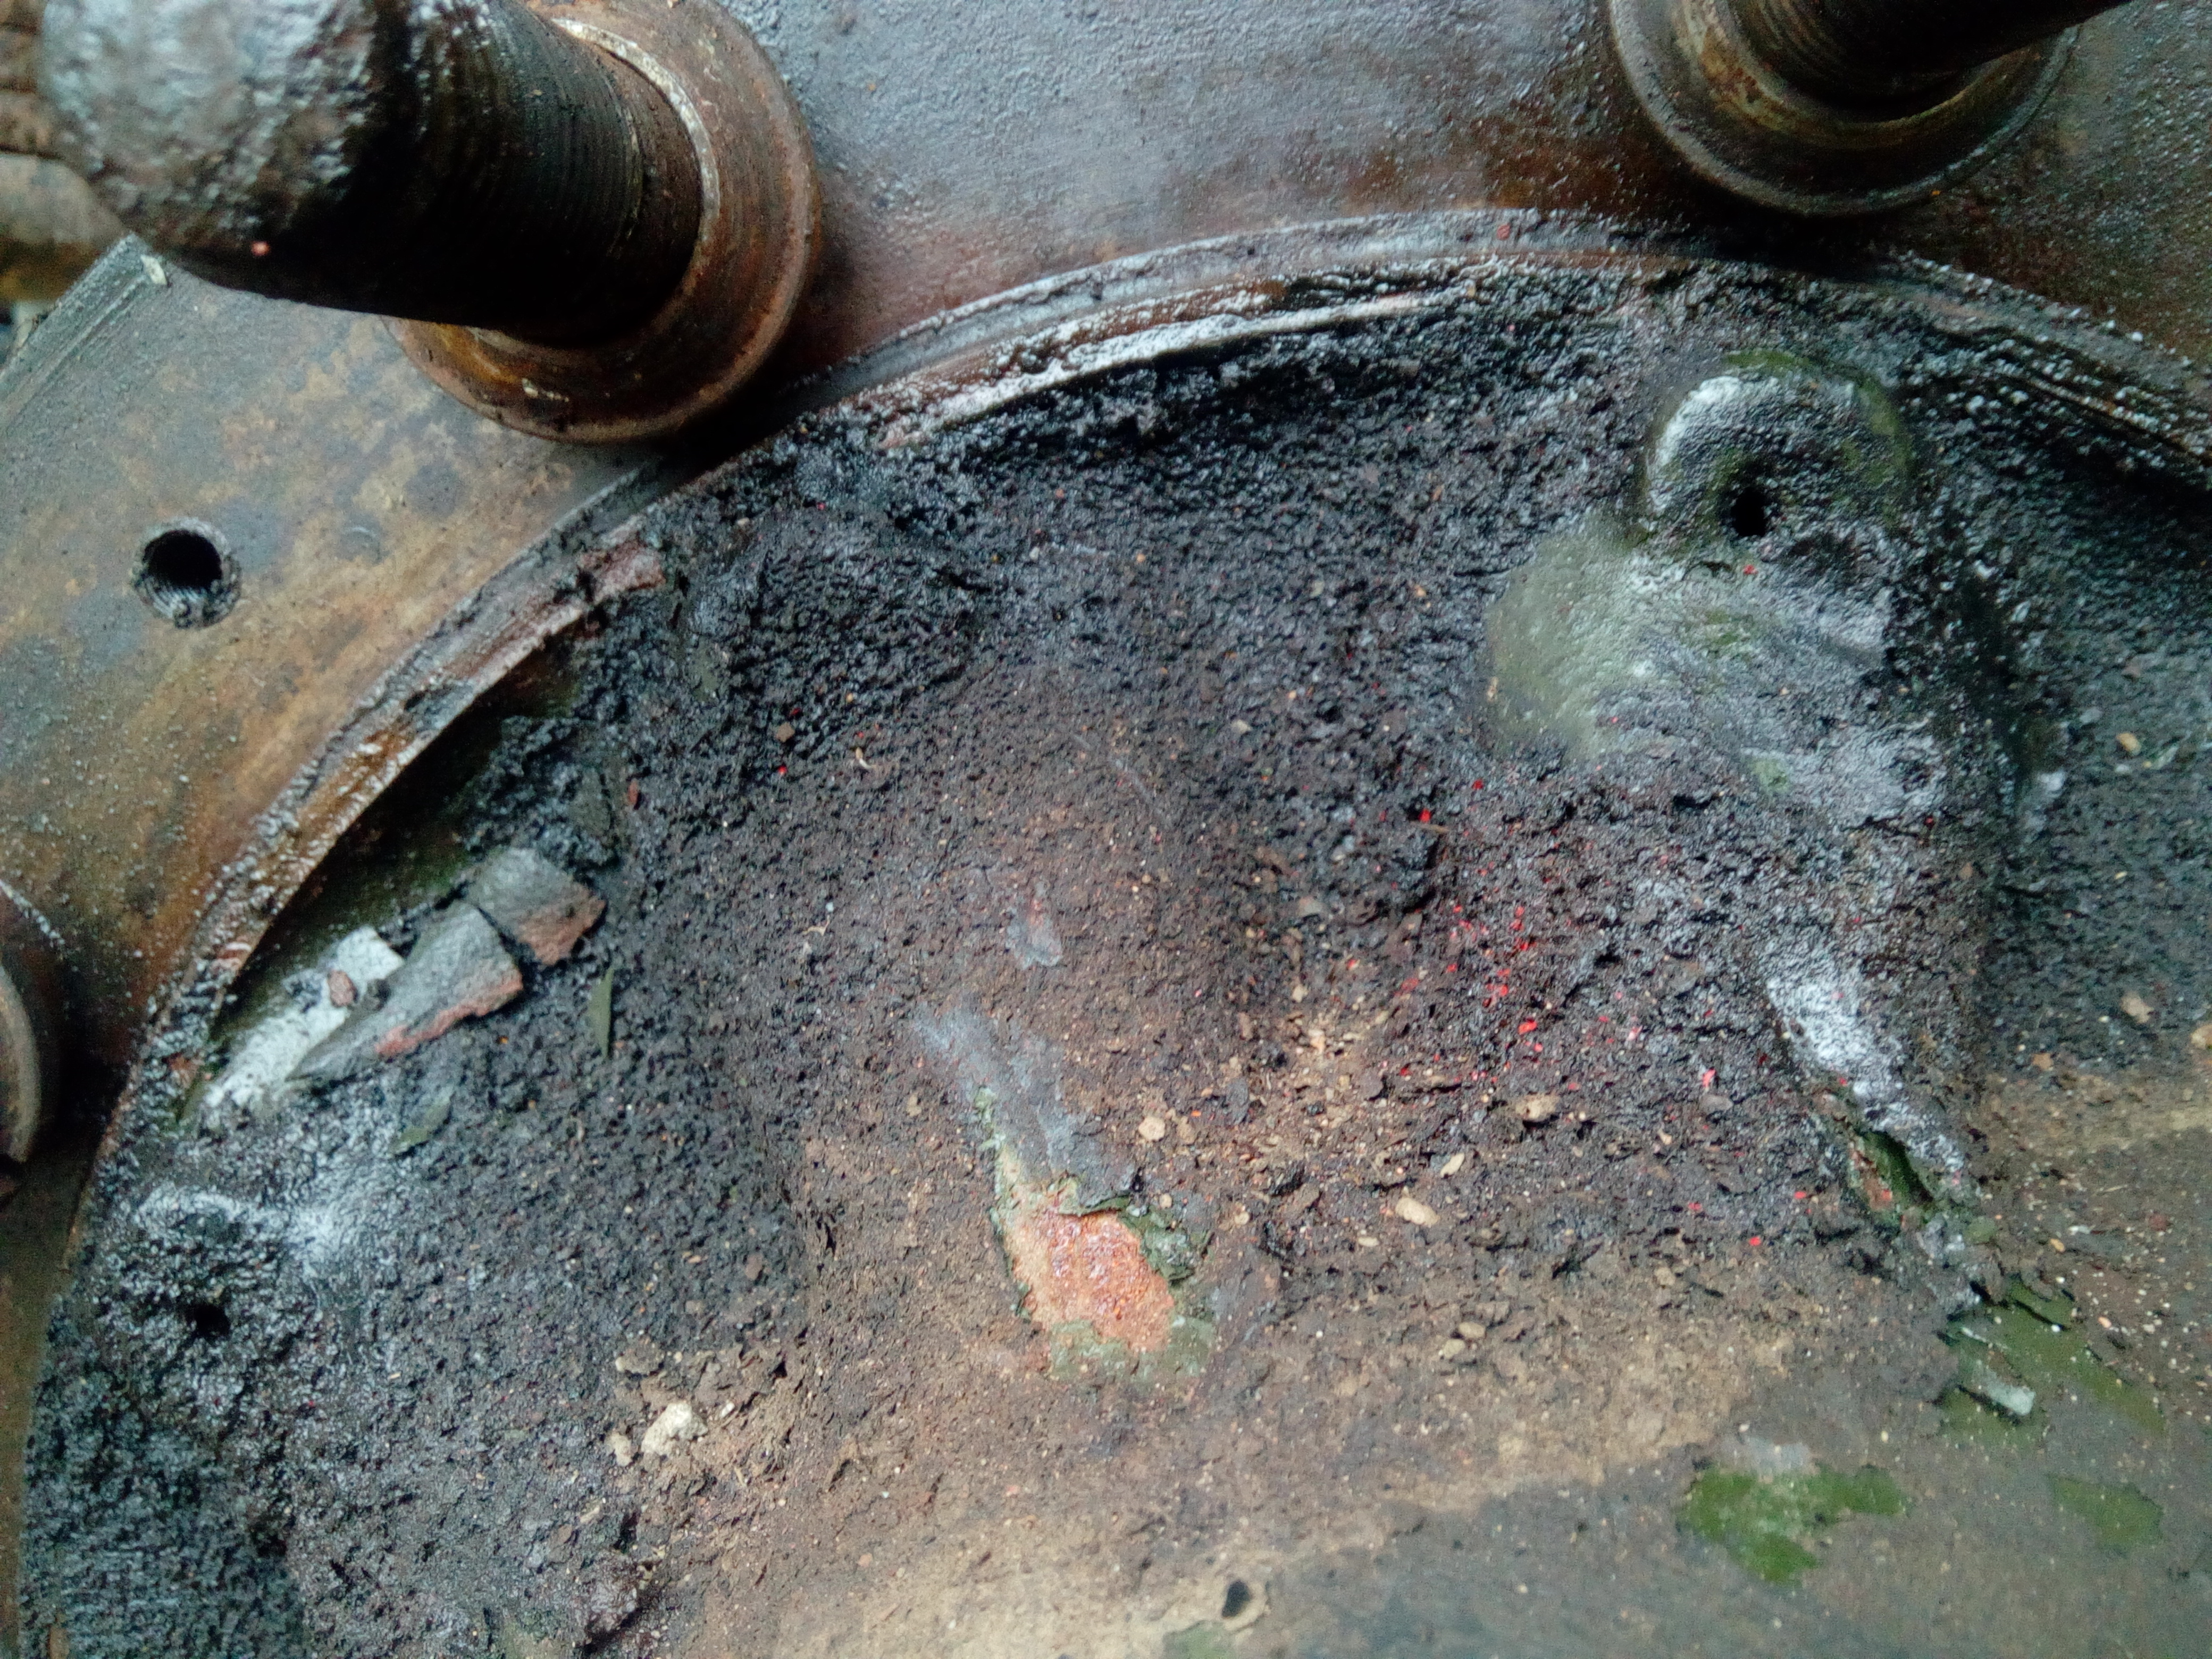 A close-up of an incredibly dirty rear wheel hub, soaked with
years of accumulated oil leakage and dirt that has built up to a heavy
slimy crust